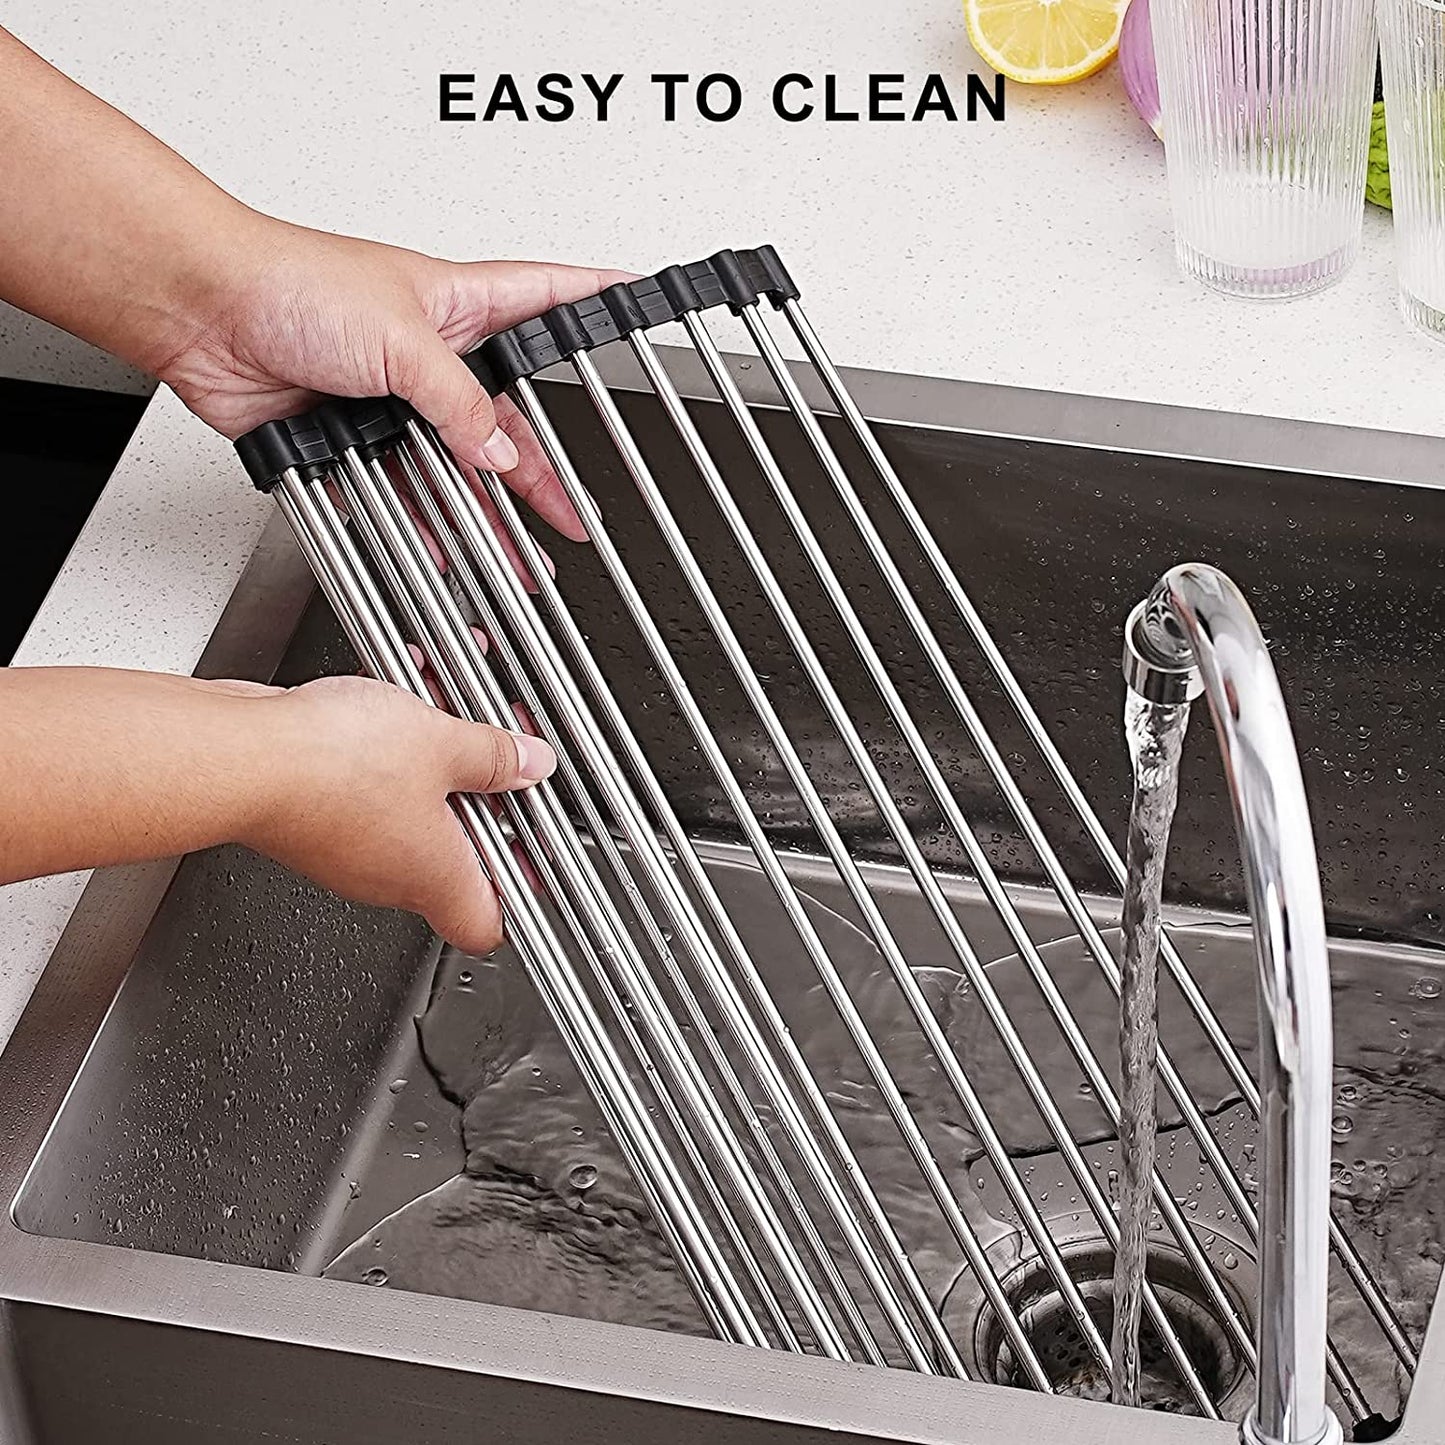 Dish Drainer Rack Foldable Dish Drainer Roll Up Dish Drying Rack Shelf Kitchen Sink Holder Organizer for Bowl Plate Storage